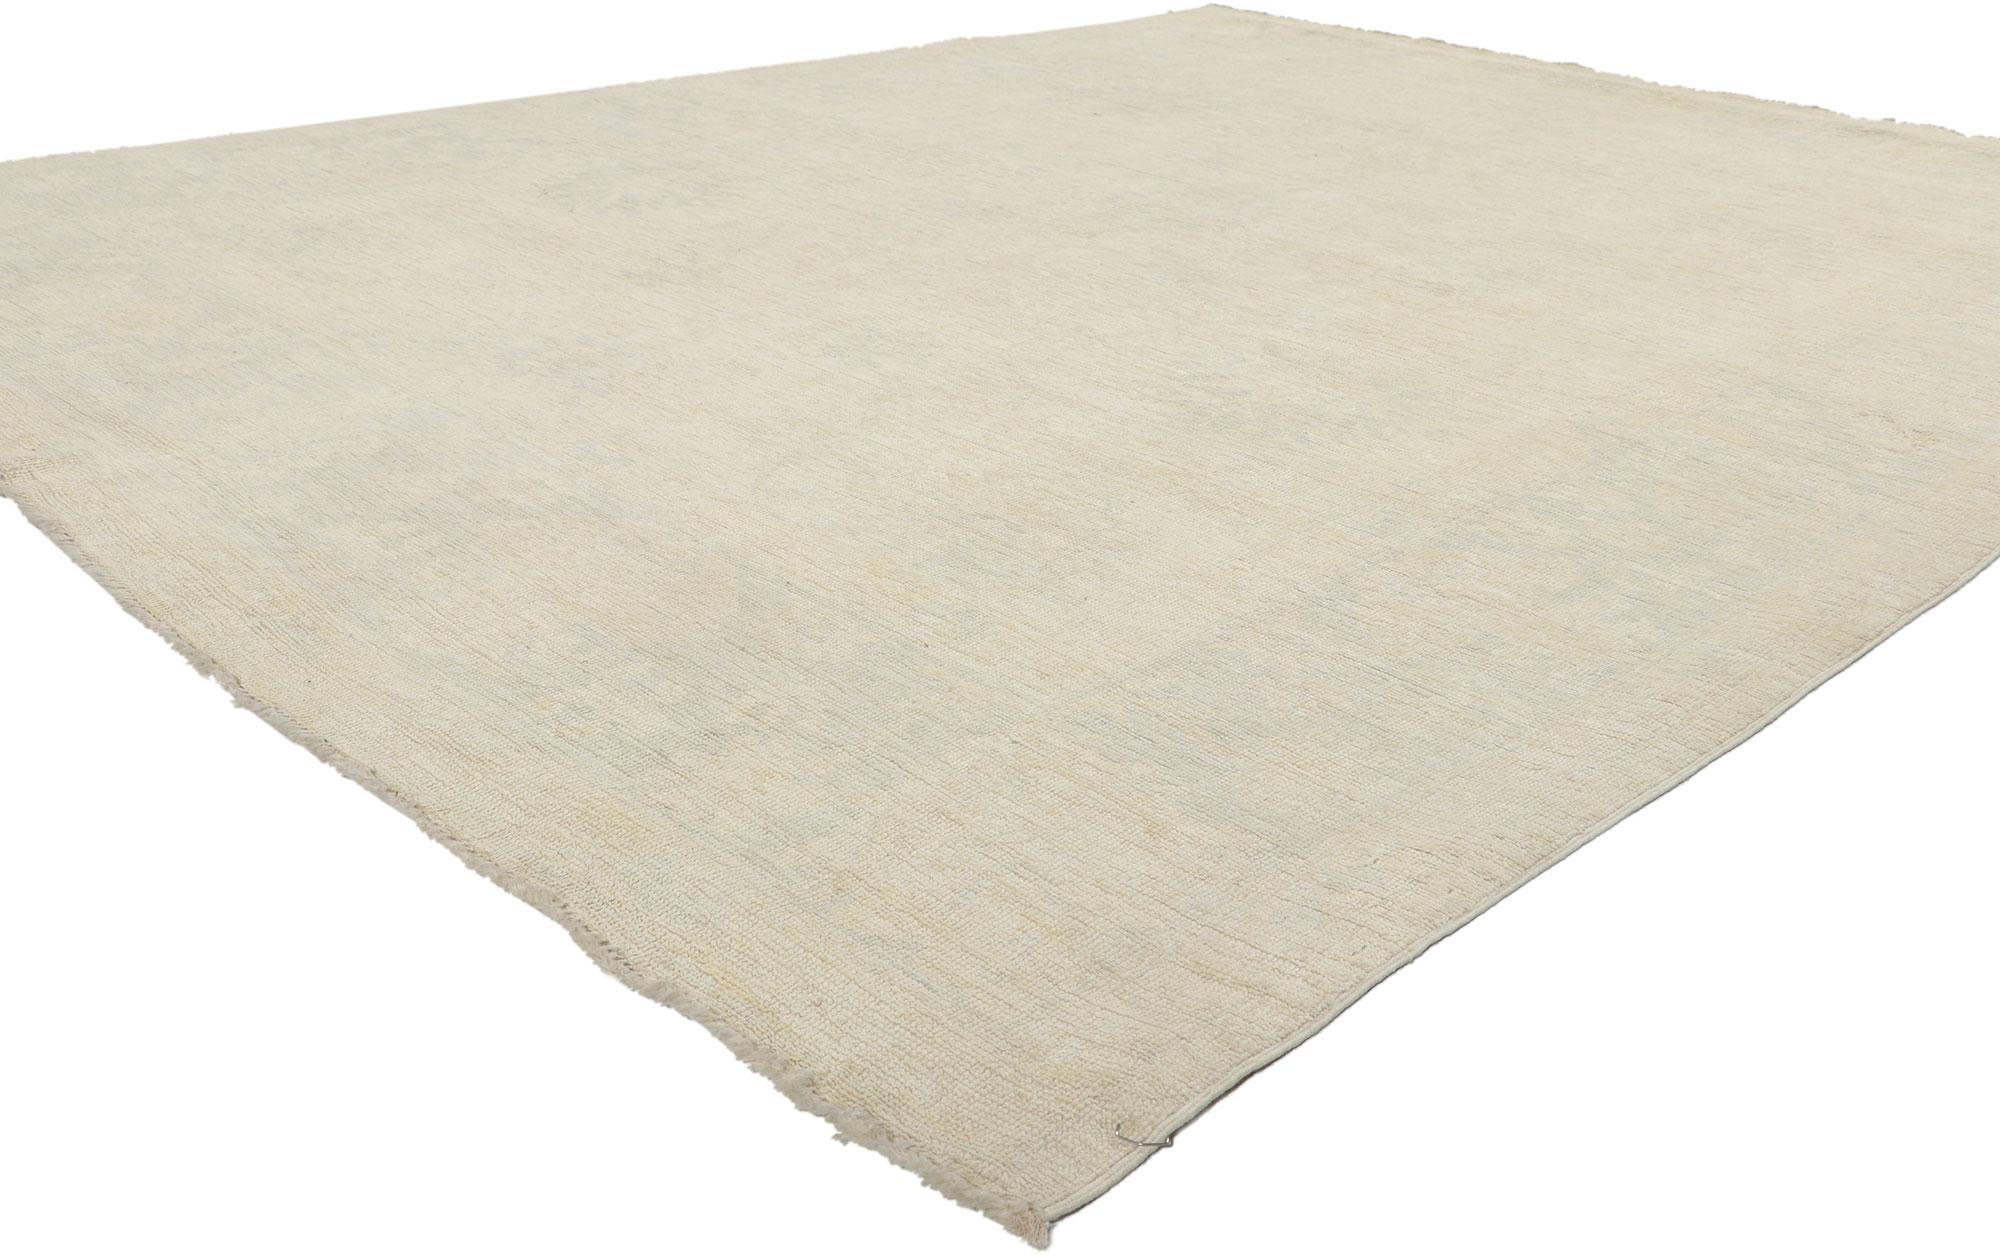 80974 New Neutral Muted Oushak Rug, 07'01 x 09'02. 
Emanating timeless style and nostalgic charm with neutral hues, this hand knotted wool muted Oushak rug creates an inimitable warmth and calming ambiance with its vintage style. The barely there